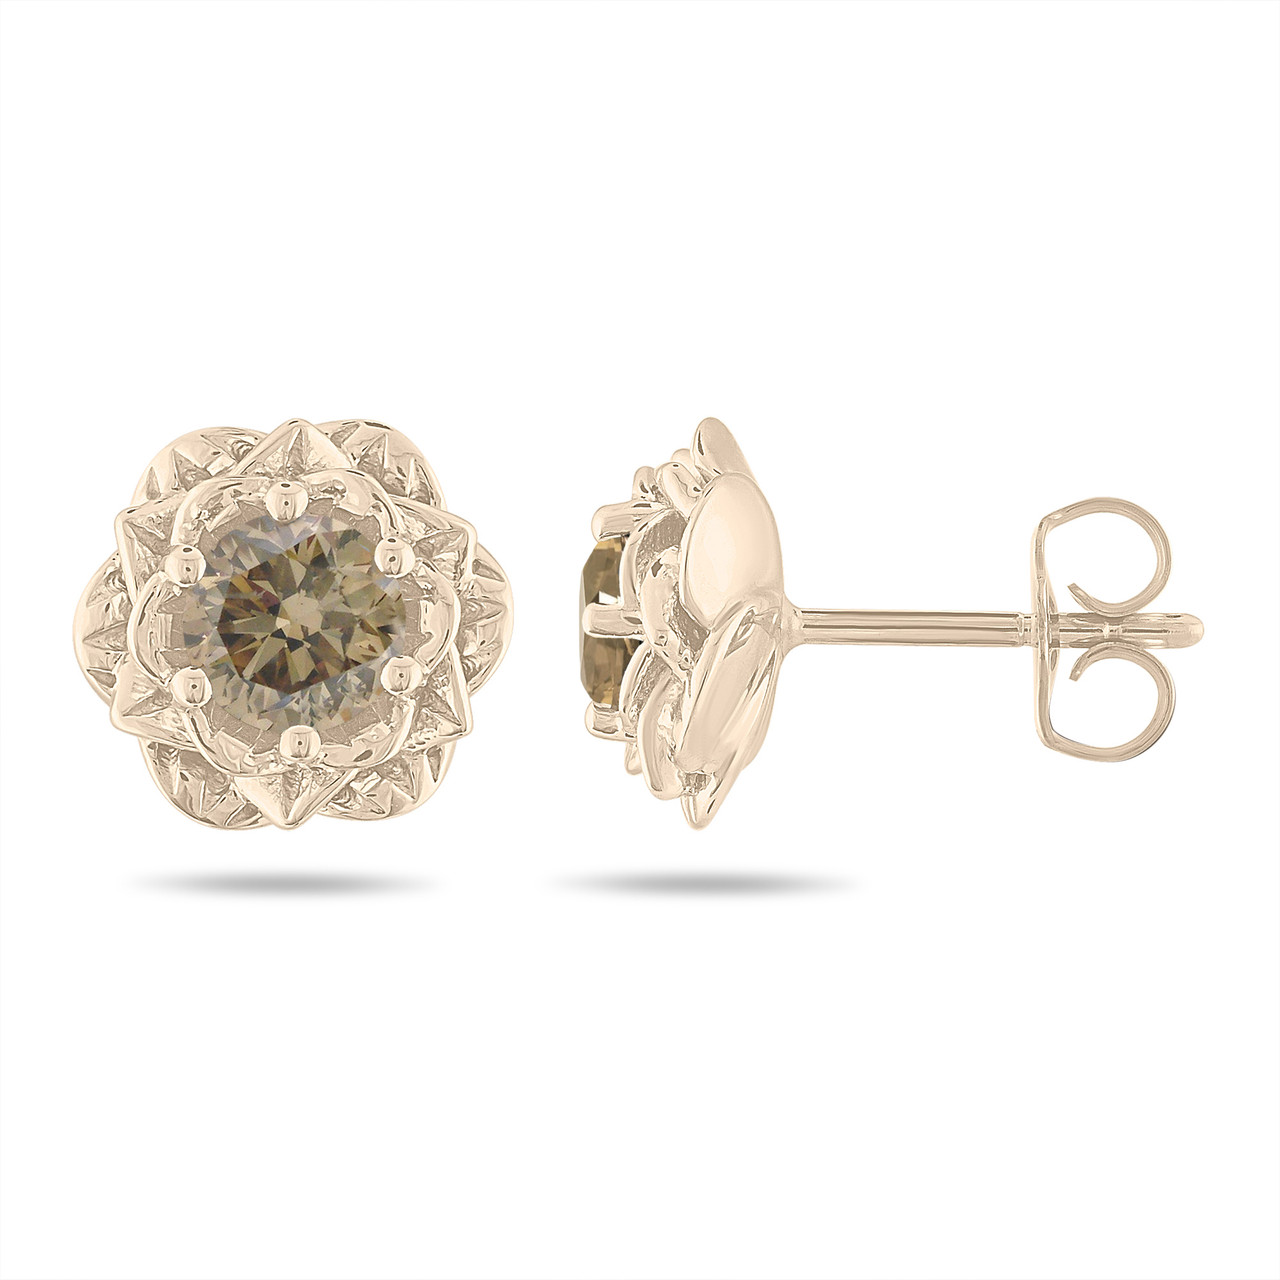 Whisper Floral Stud Earrings in Sterling Silver Plated 18K Gold